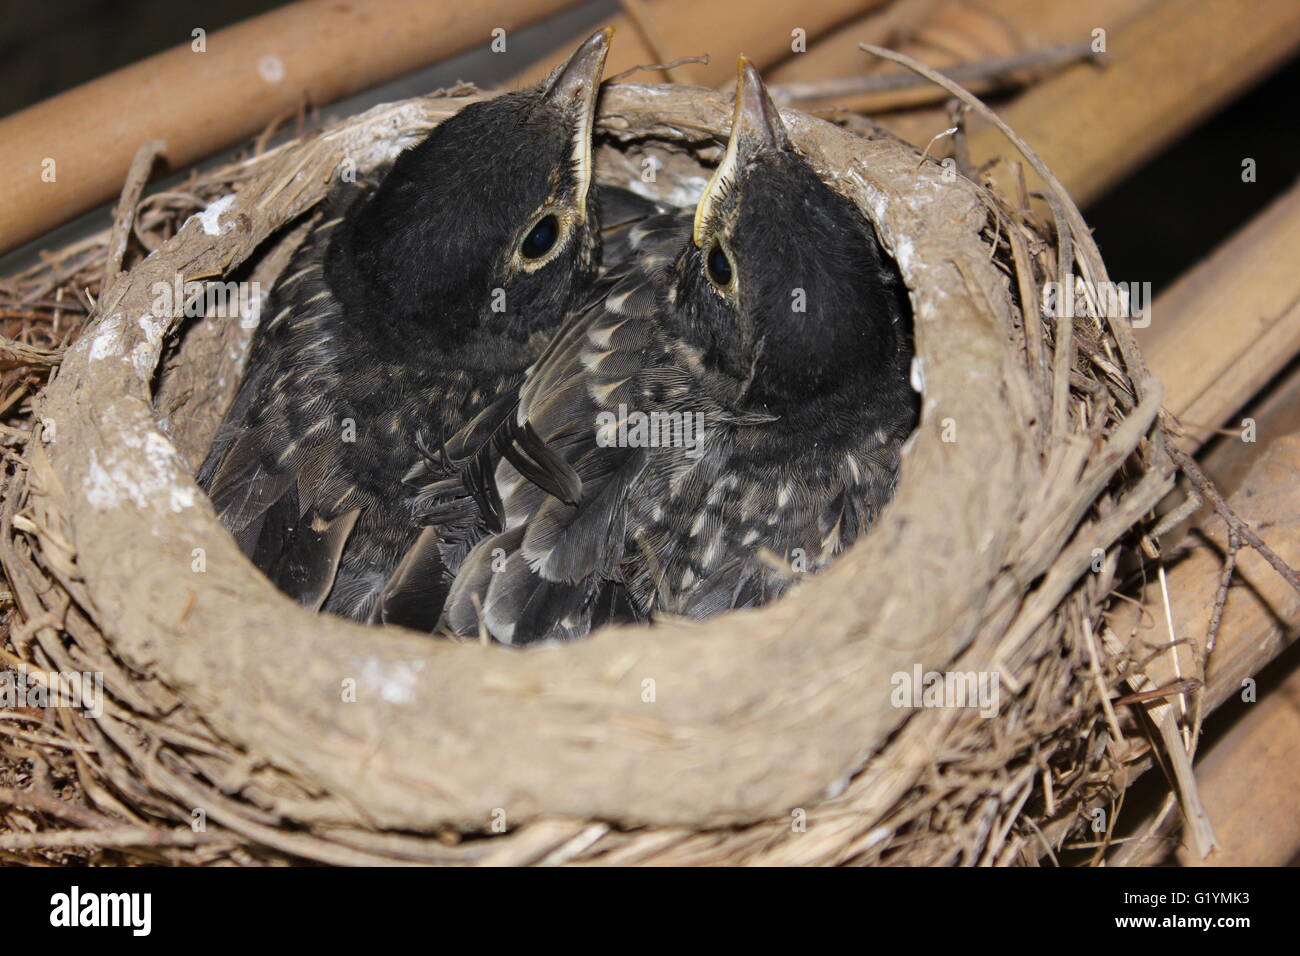 Baby birds in a nest with a snug fit Stock Photo